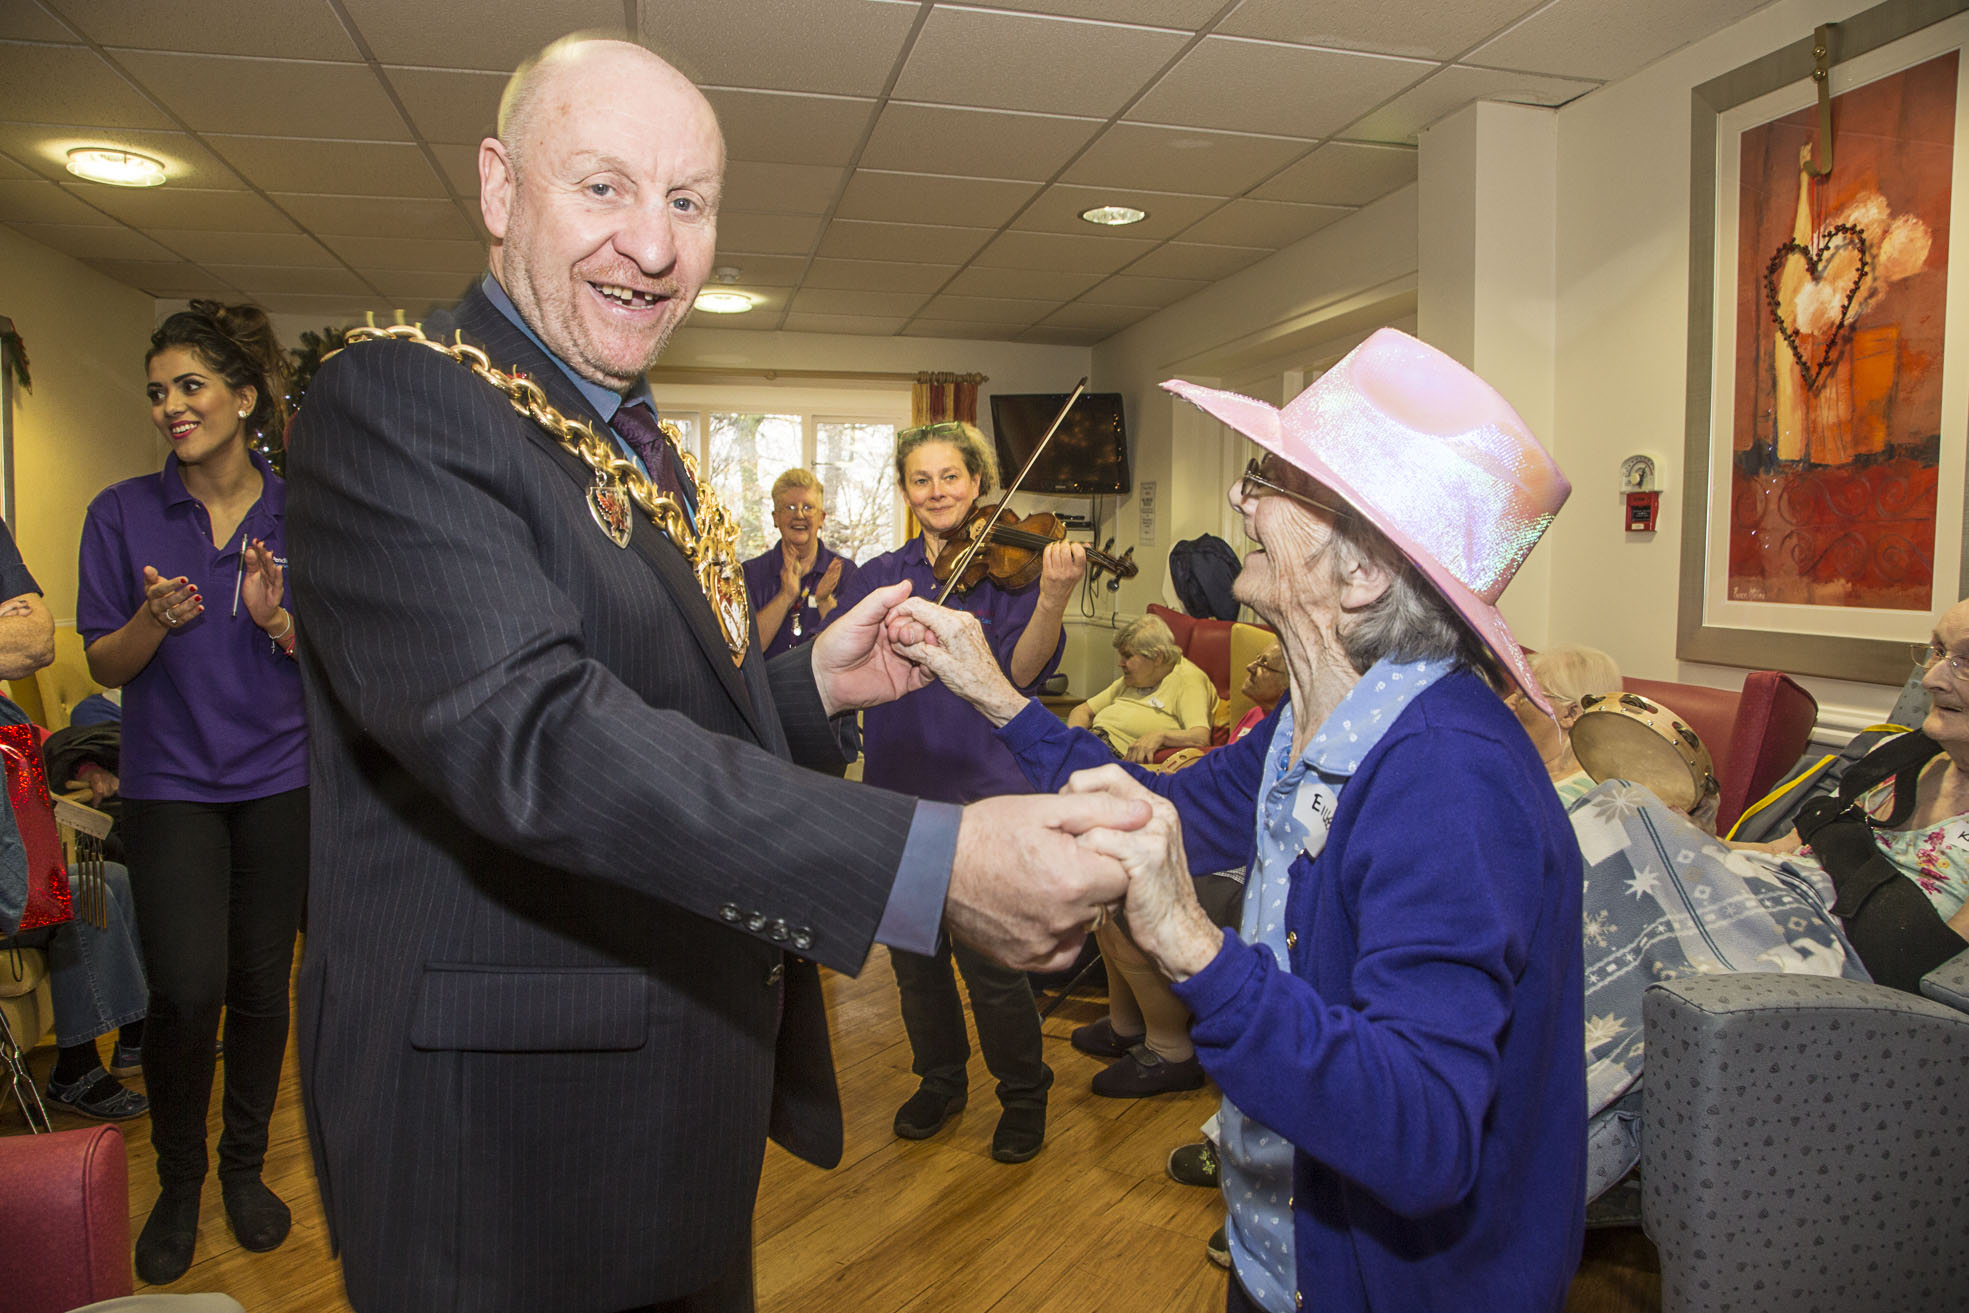 Care home residents and Mayor dance to festive tunes